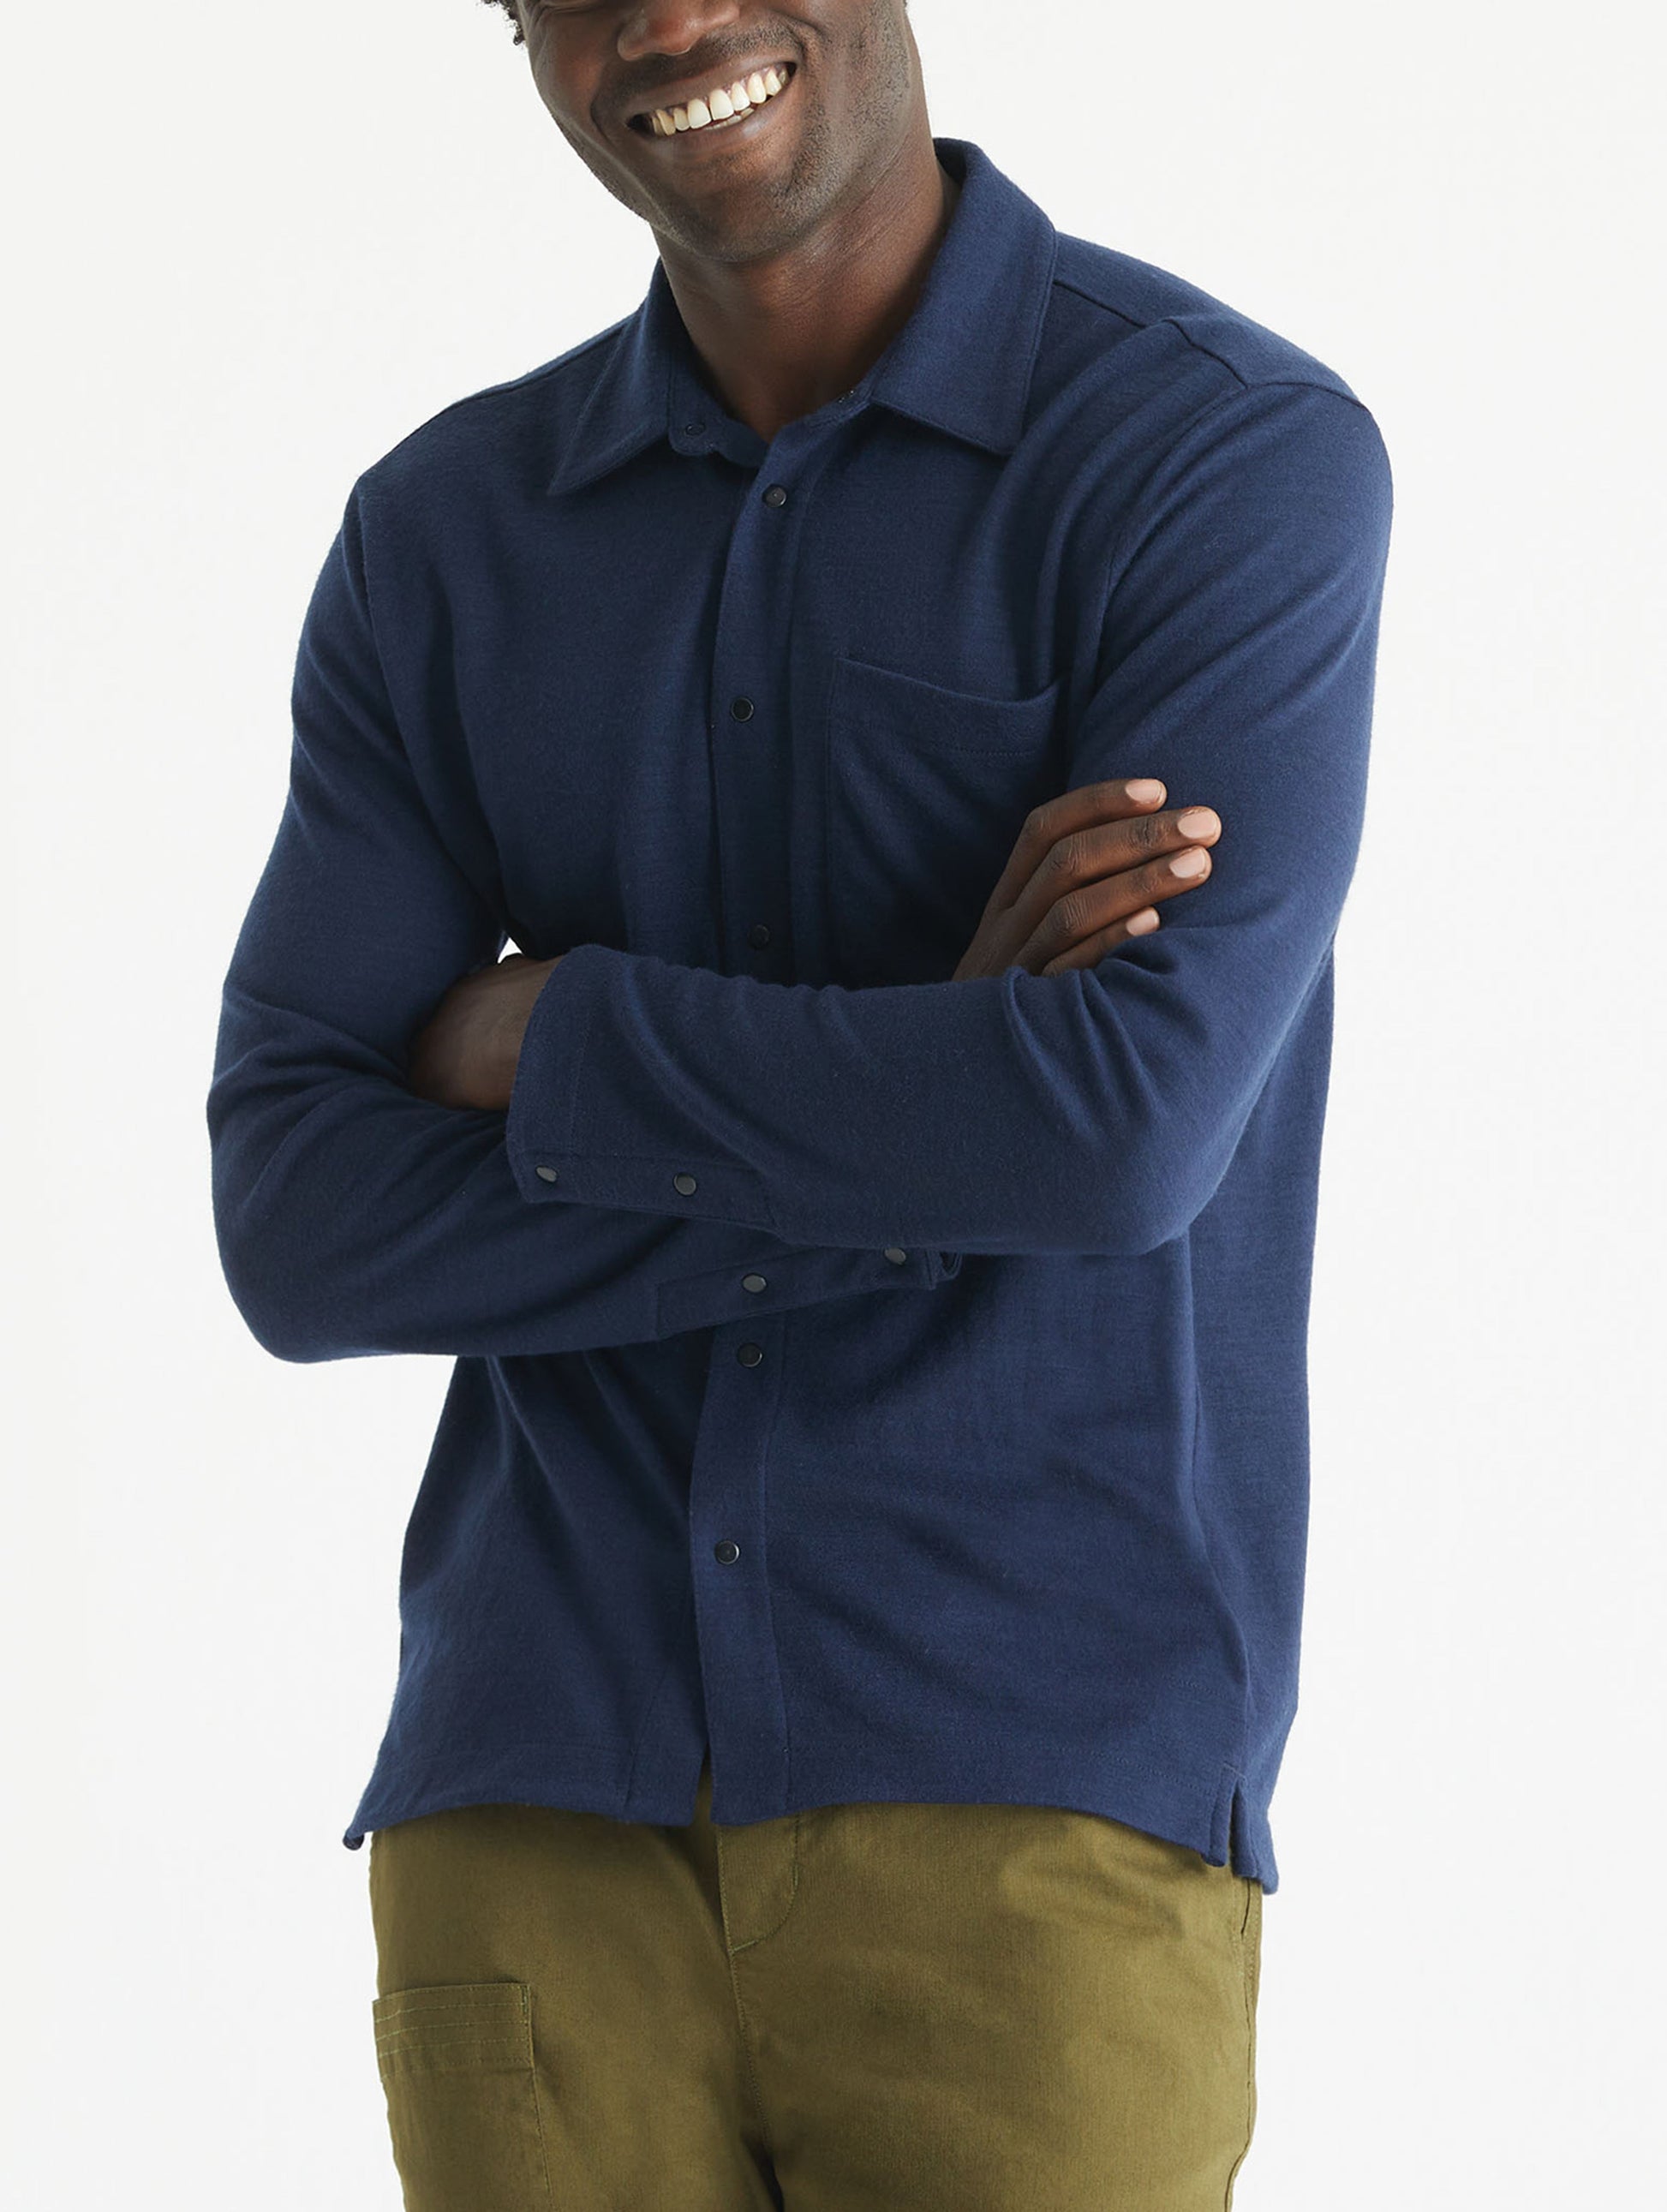 long-sleeve shirt from Aether Apparel